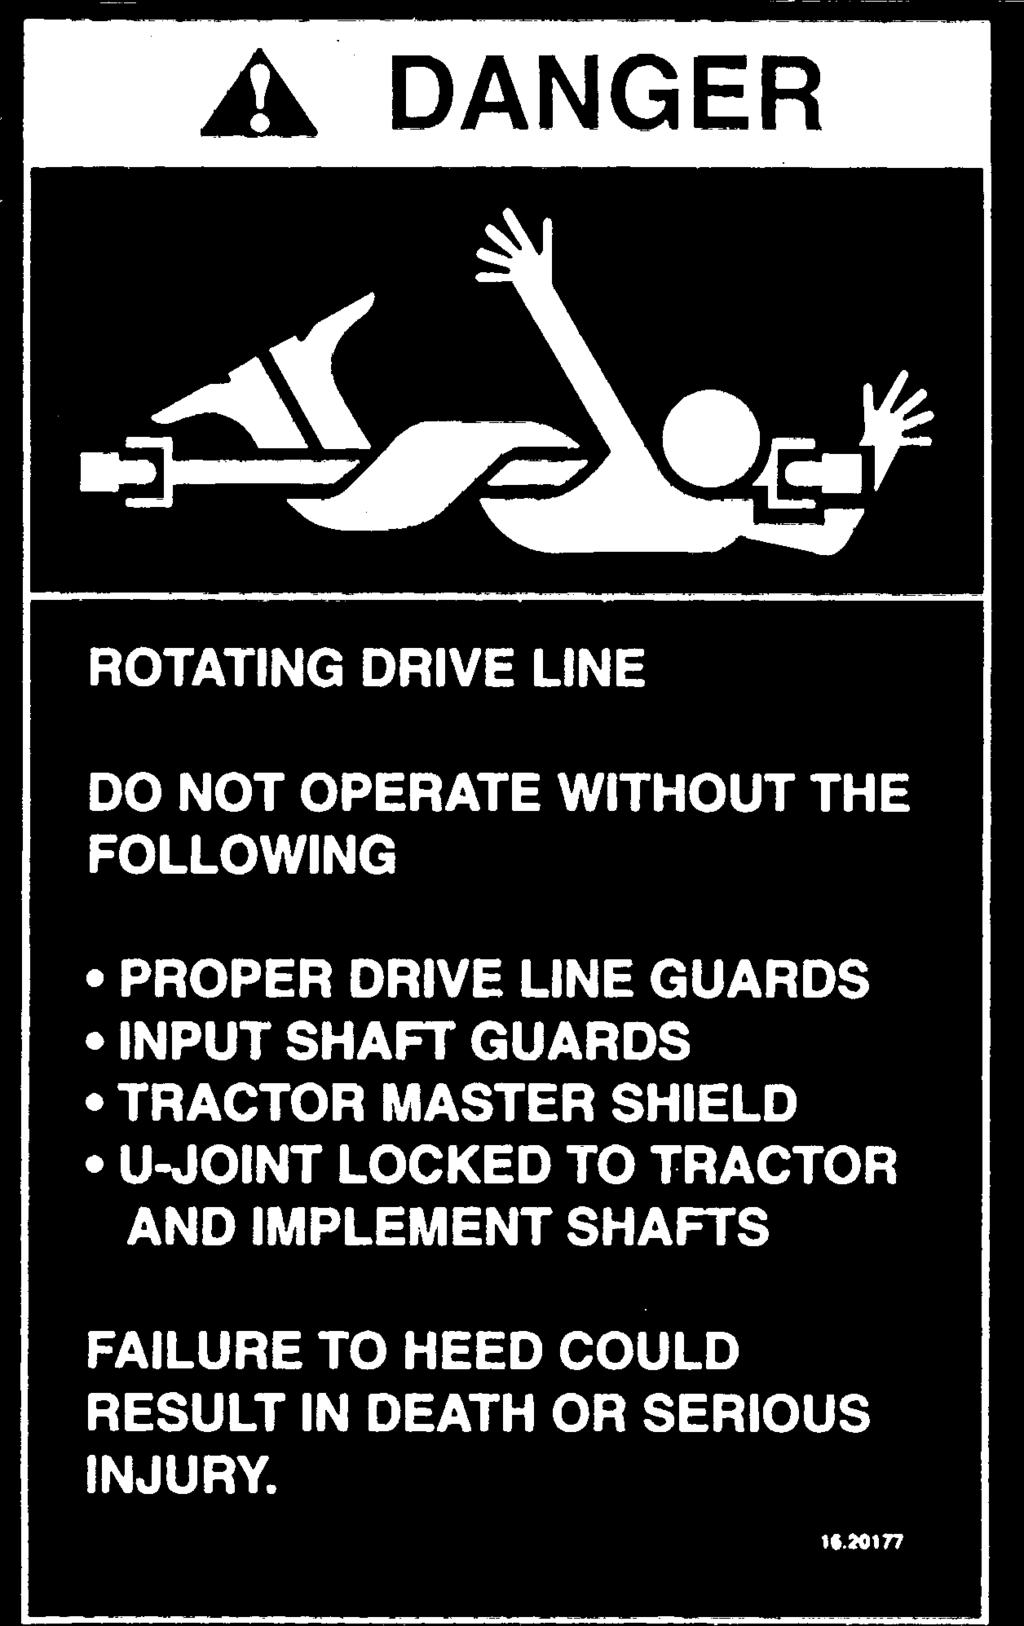 This decal is mounted on the driveline and